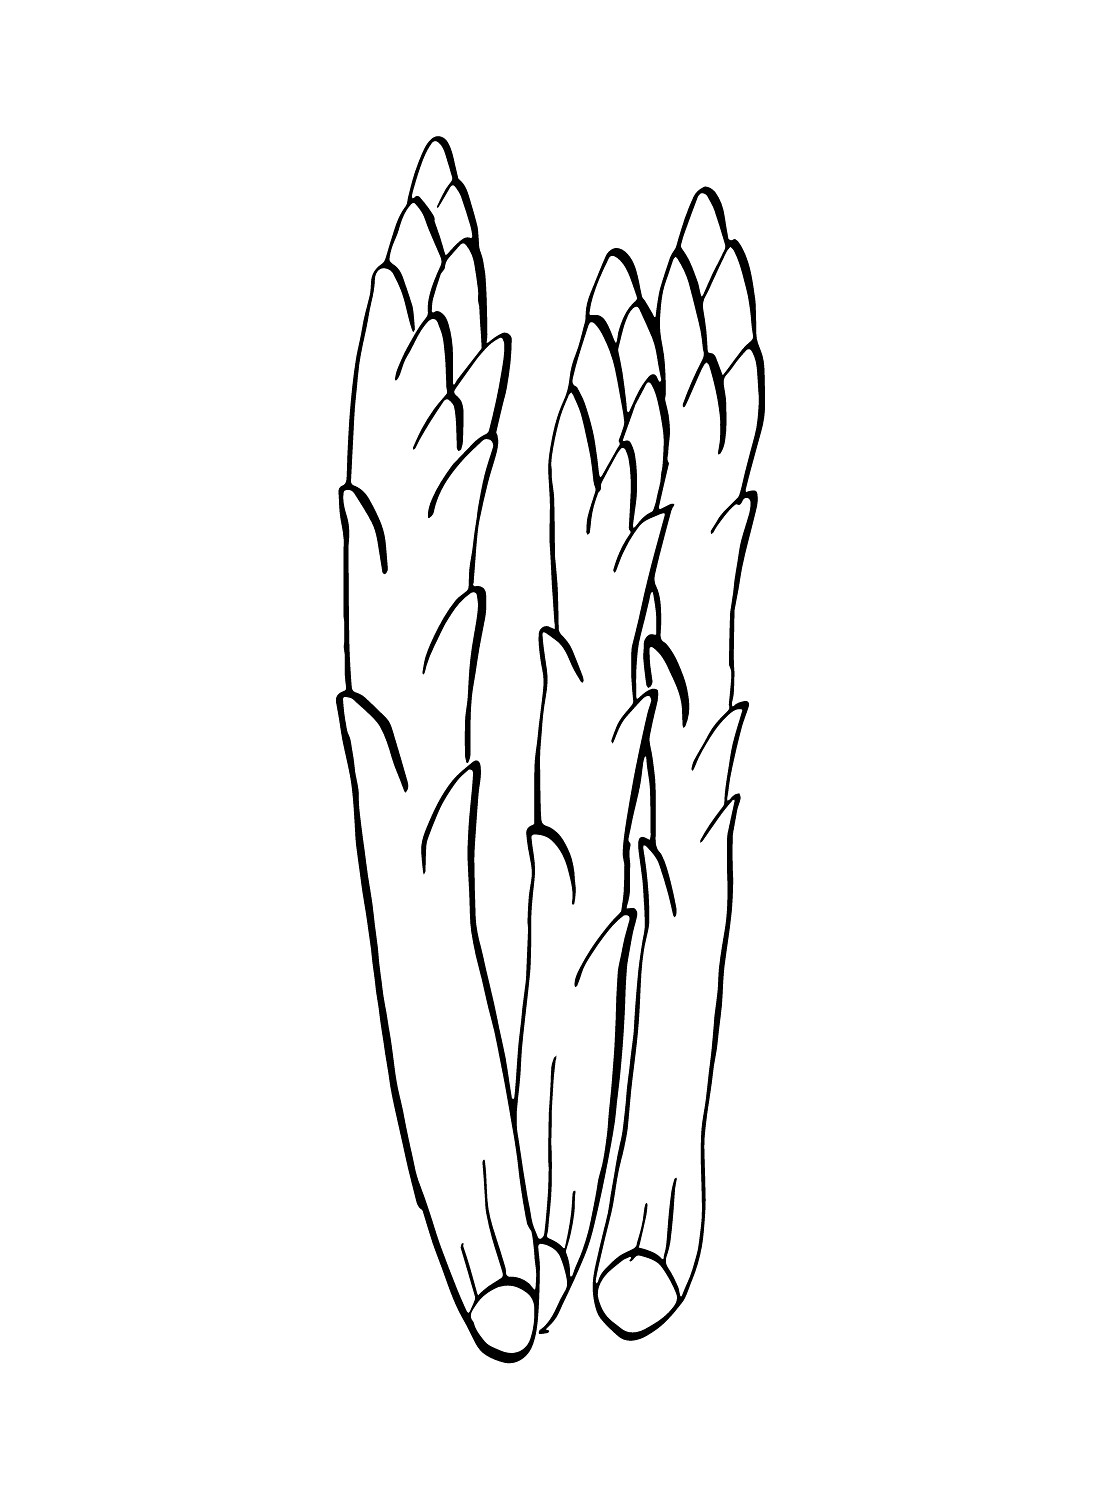 Asparagus Free Printable Coloring Pages - Asparagus Coloring Pages - Coloring  Pages For Kids And Adults